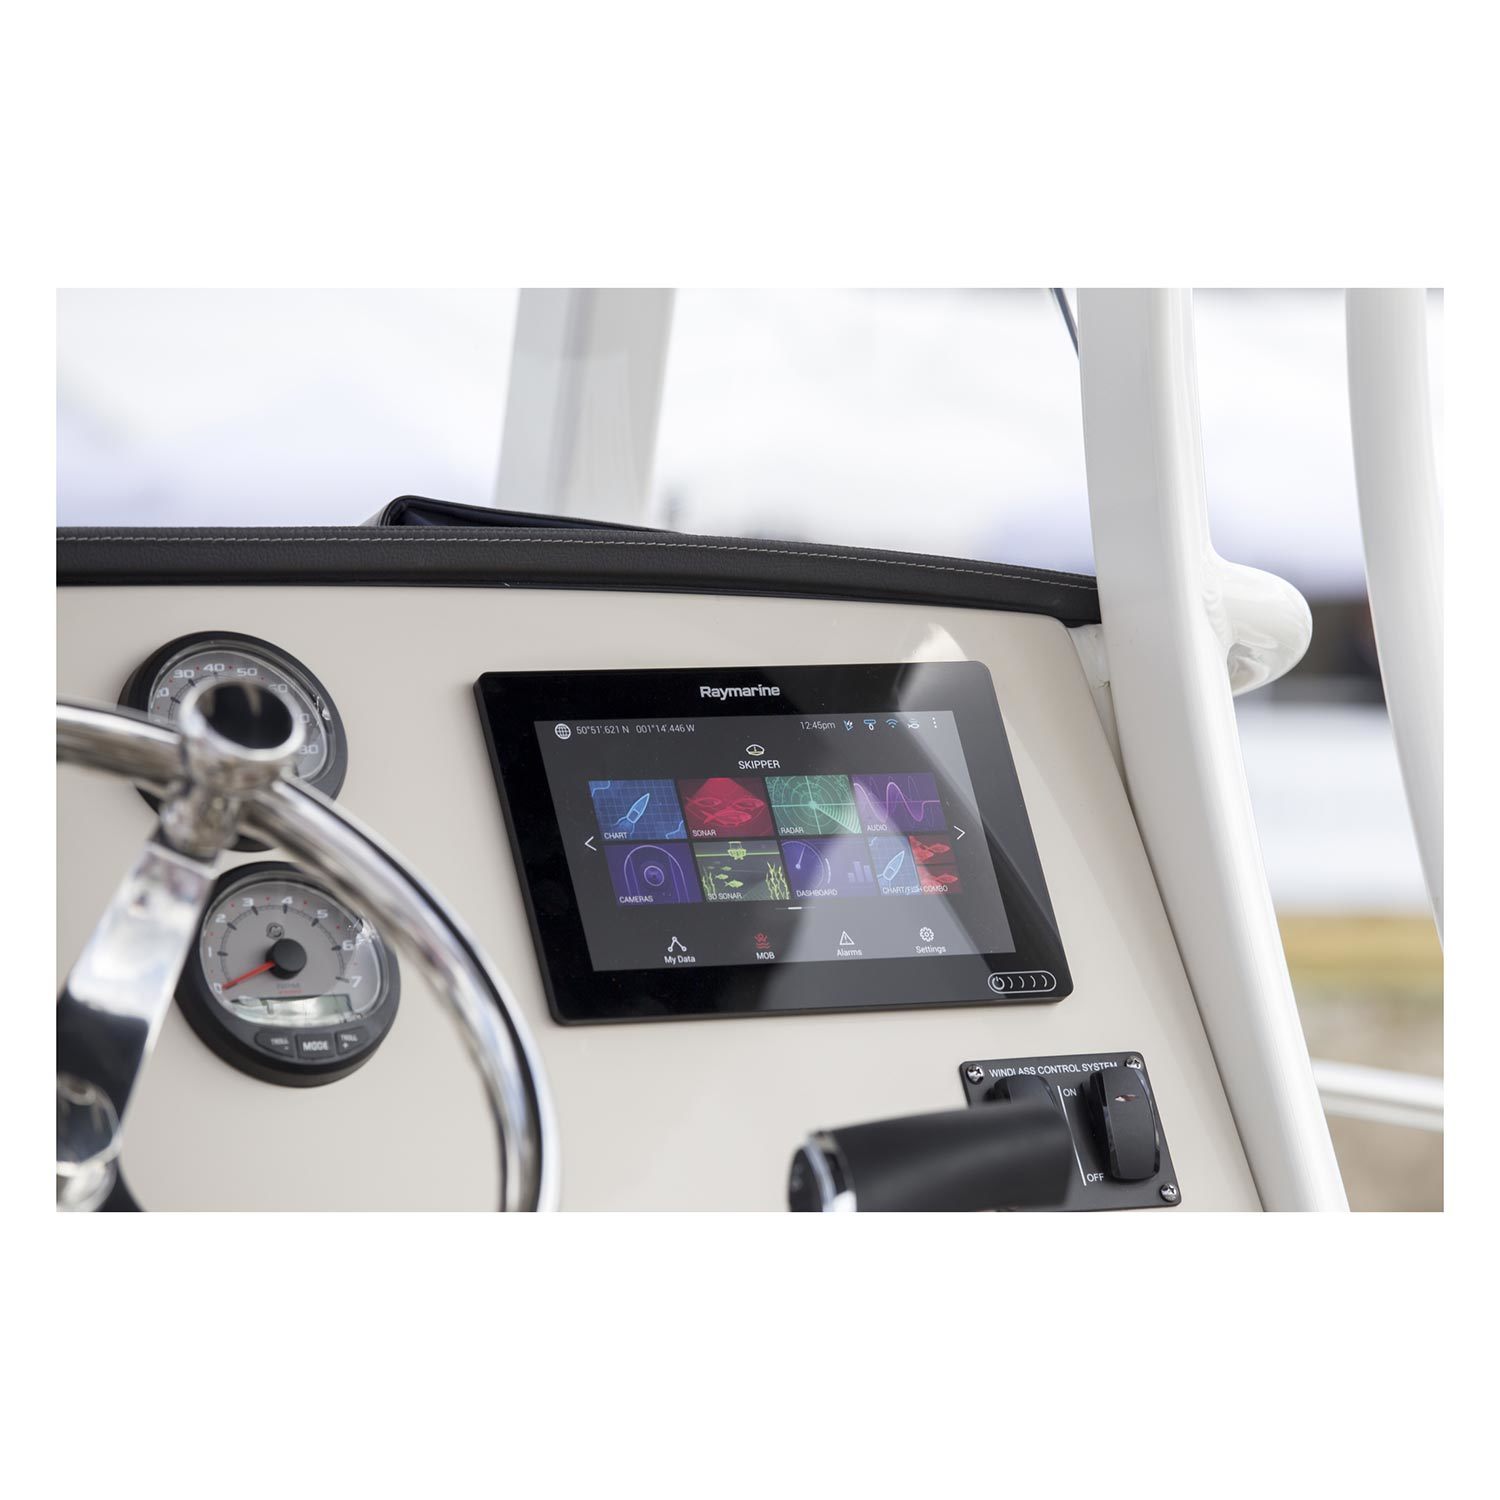 AXIOM DV Multifunction Display with CPT-90DVS Transducer and Navionics+  Charts West Marine